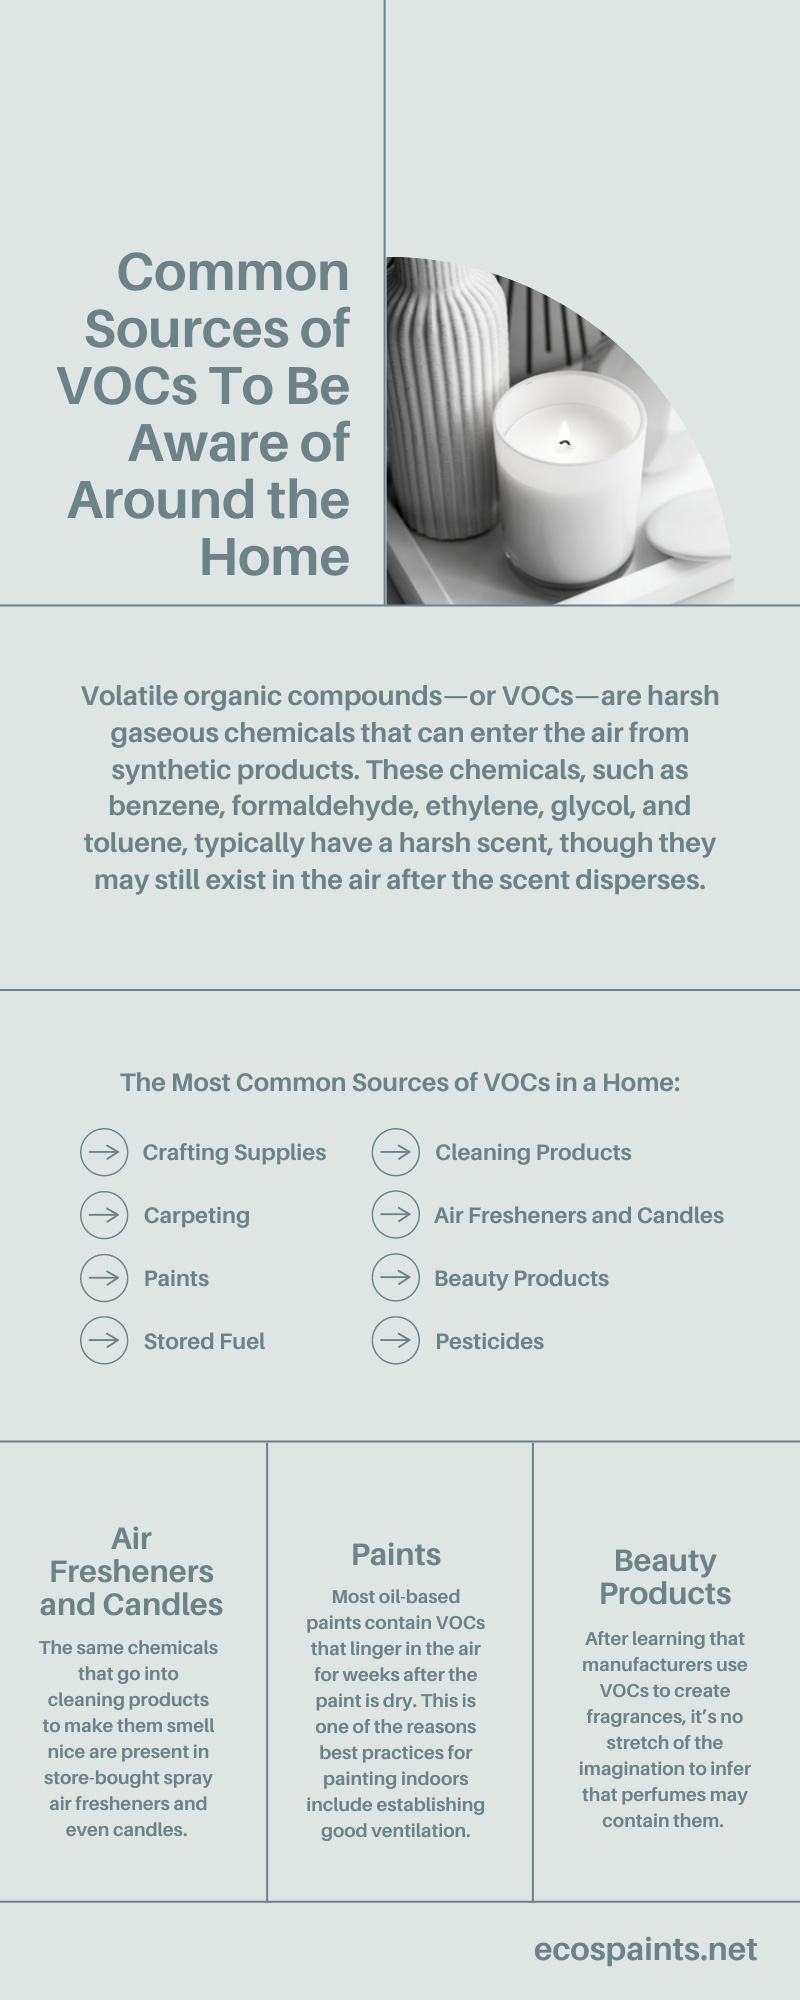 Common Sources of VOCs To Be Aware of Around the Home